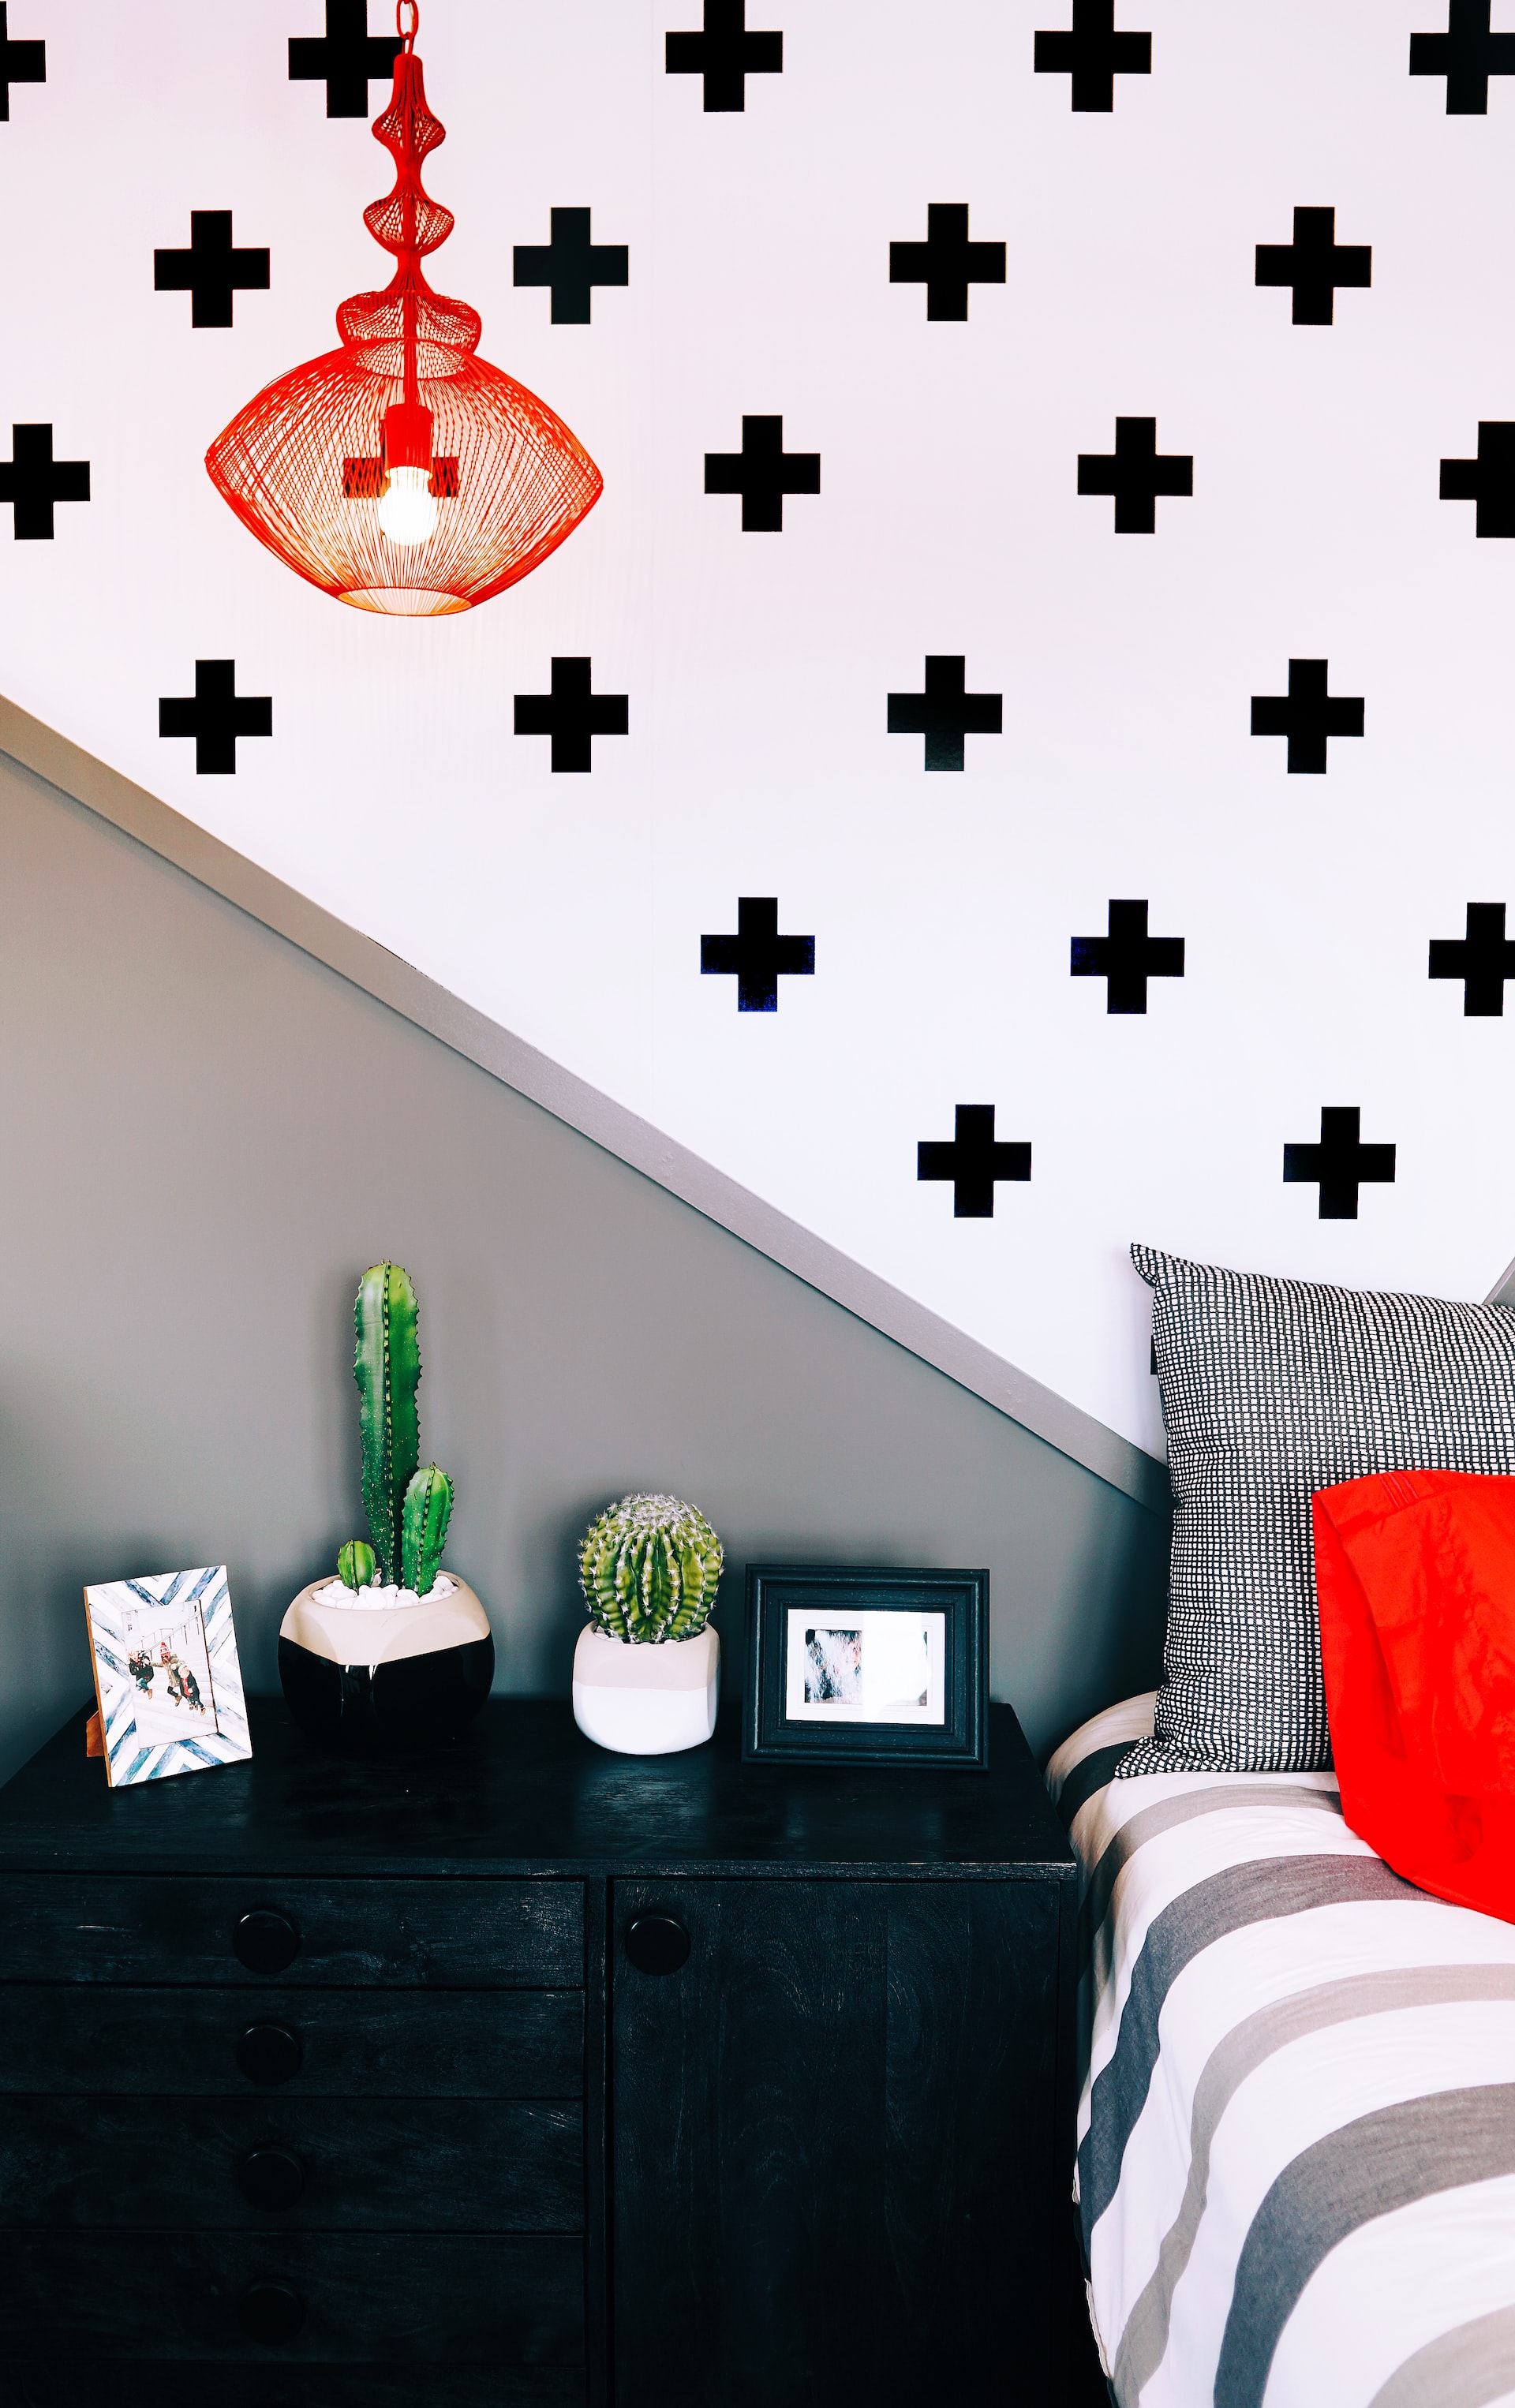 Wallpaper with black cross shapes in a bedroom.